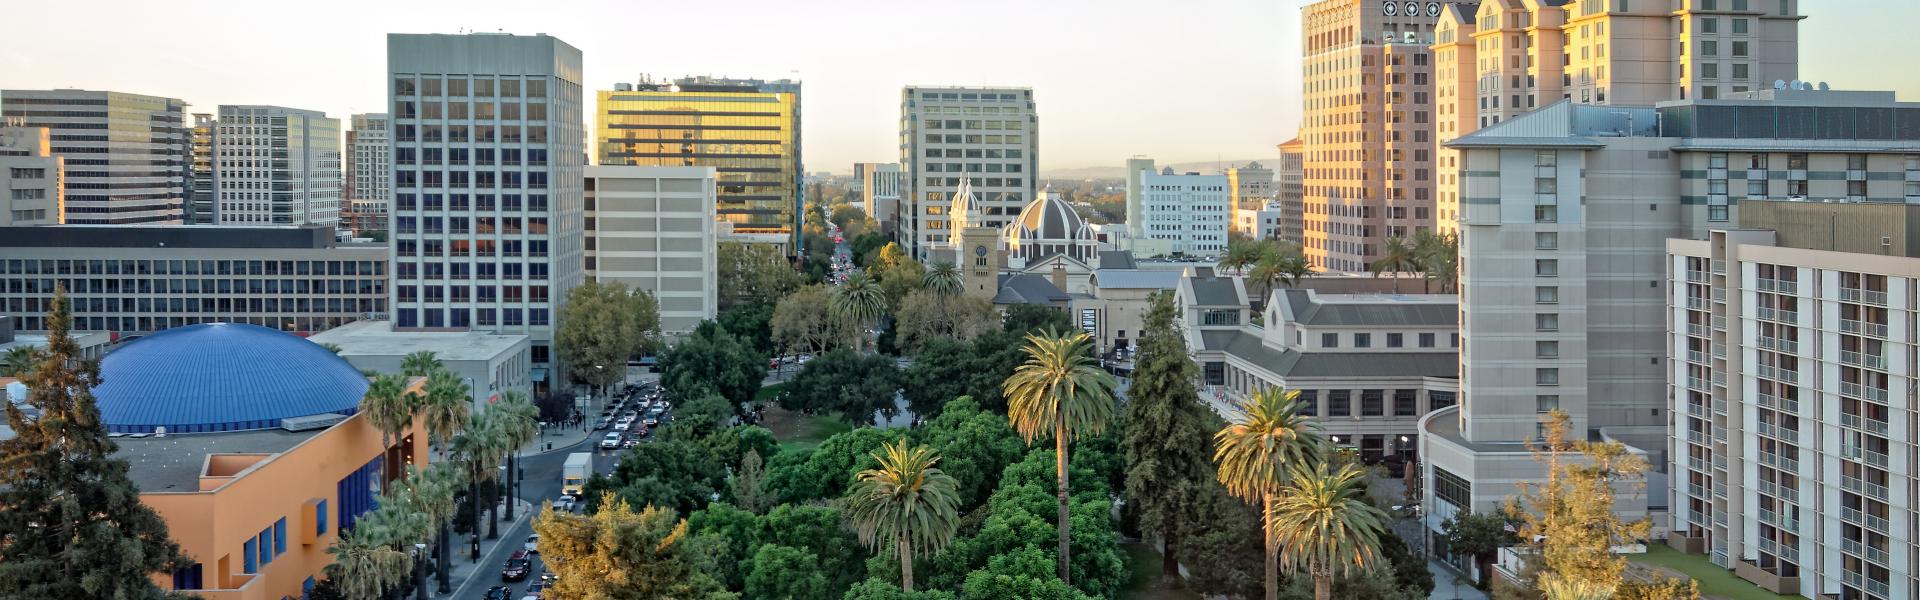 Holiday lettings & accommodation in San Jose - HomeToGo